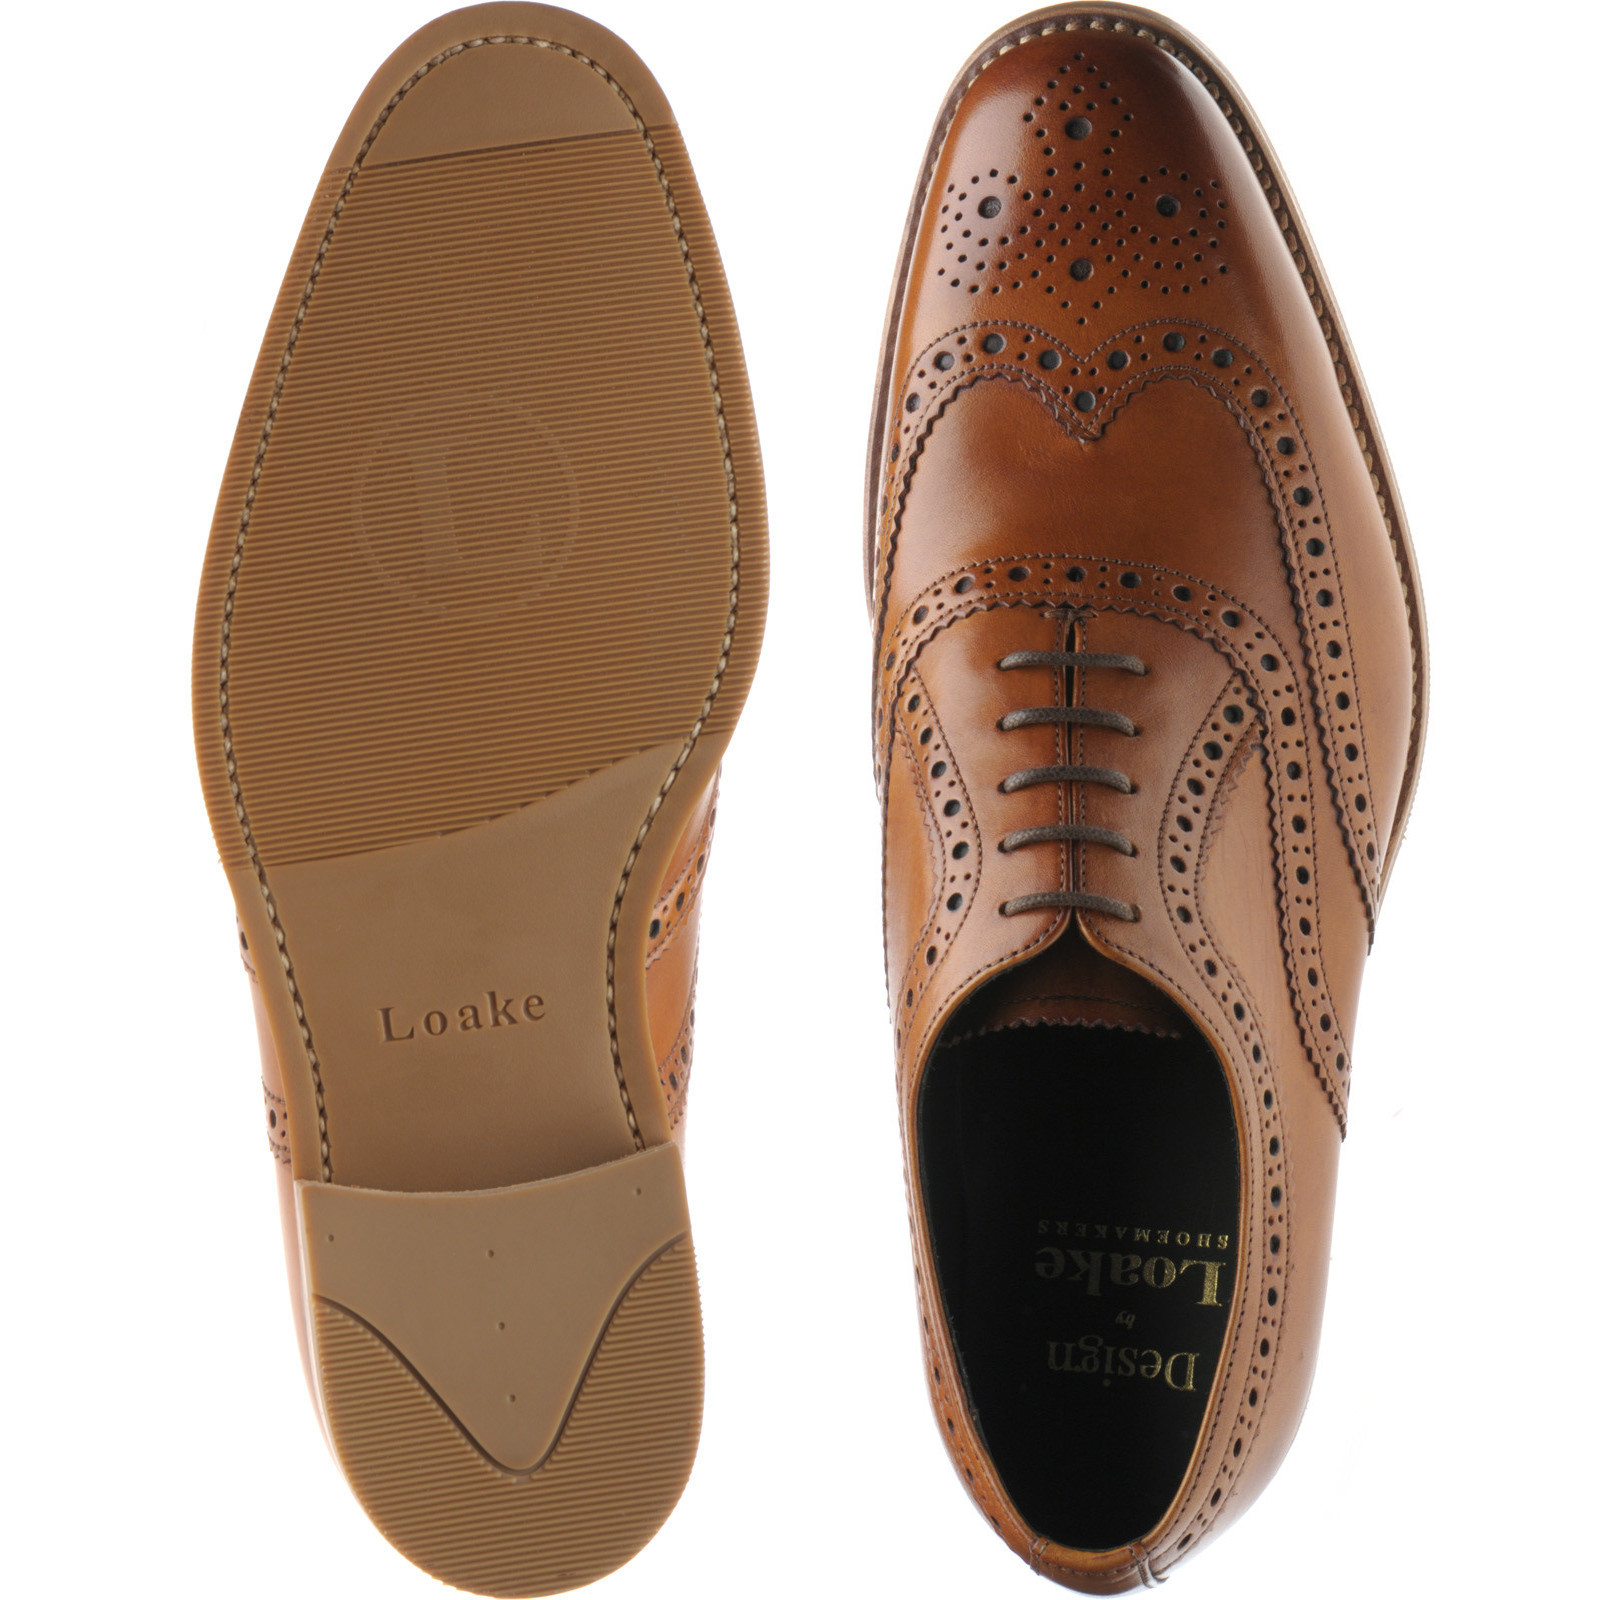 Loake shoes | Loake Exclusive | Fearnley Rubber rubber-soled brogues in ...